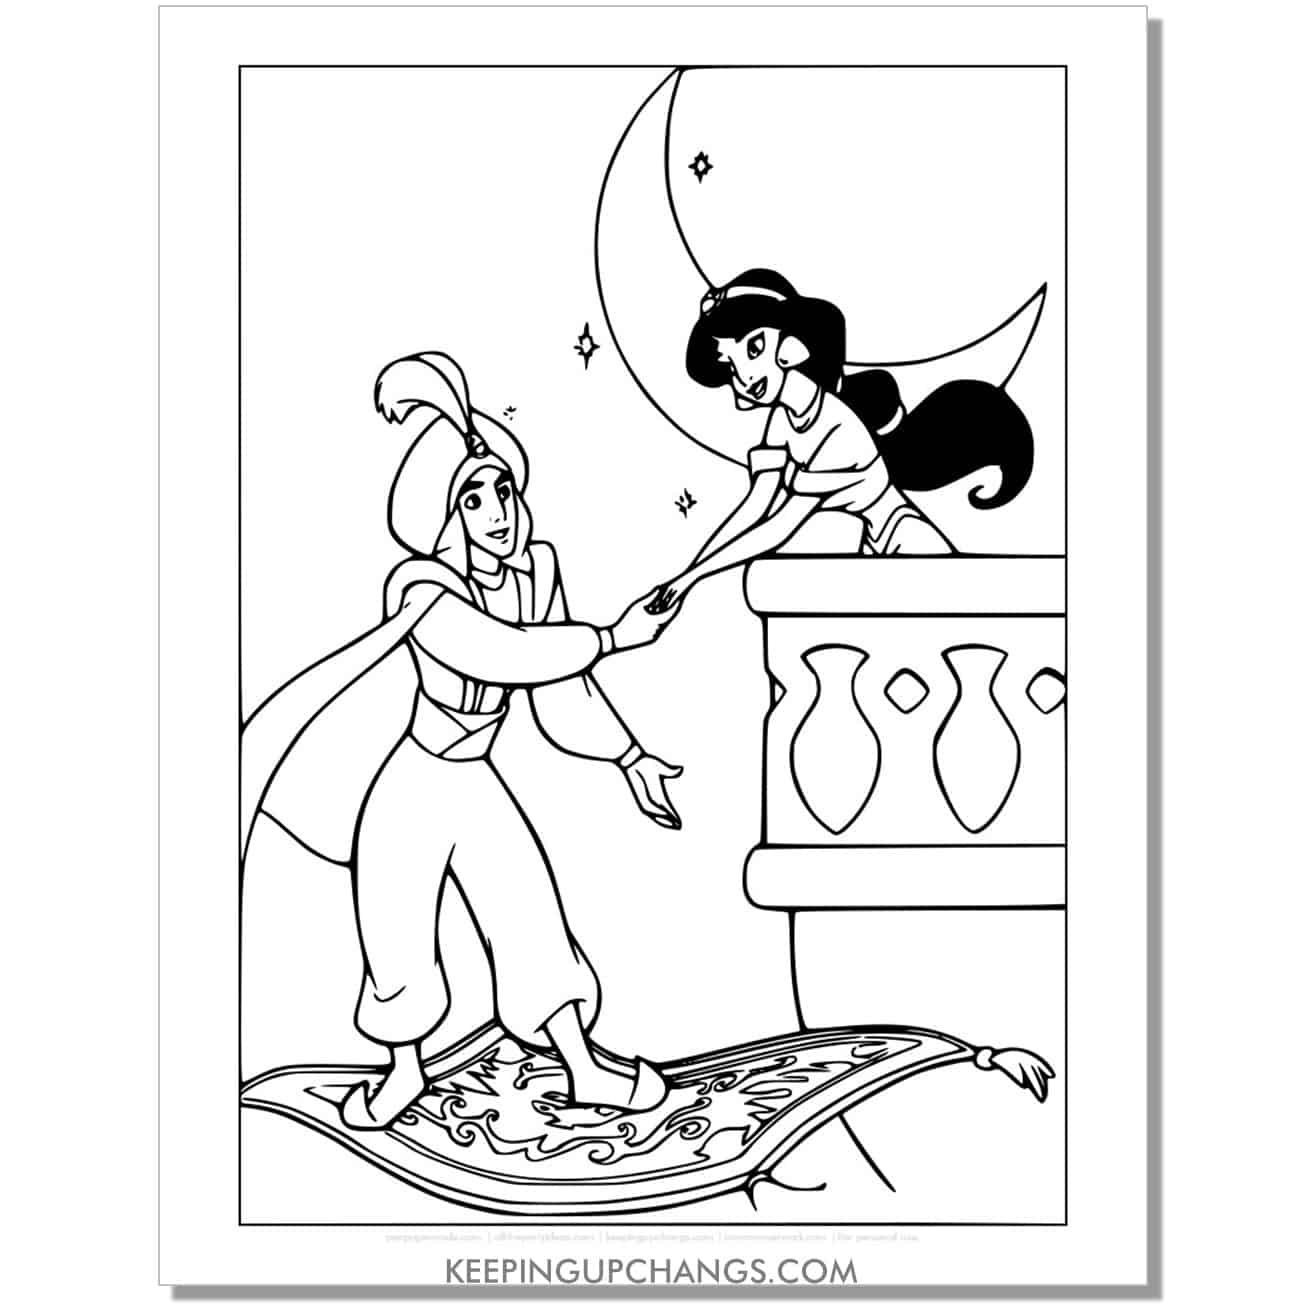 jasmine and aladdin at balcony with magic carpet coloring page, sheet.